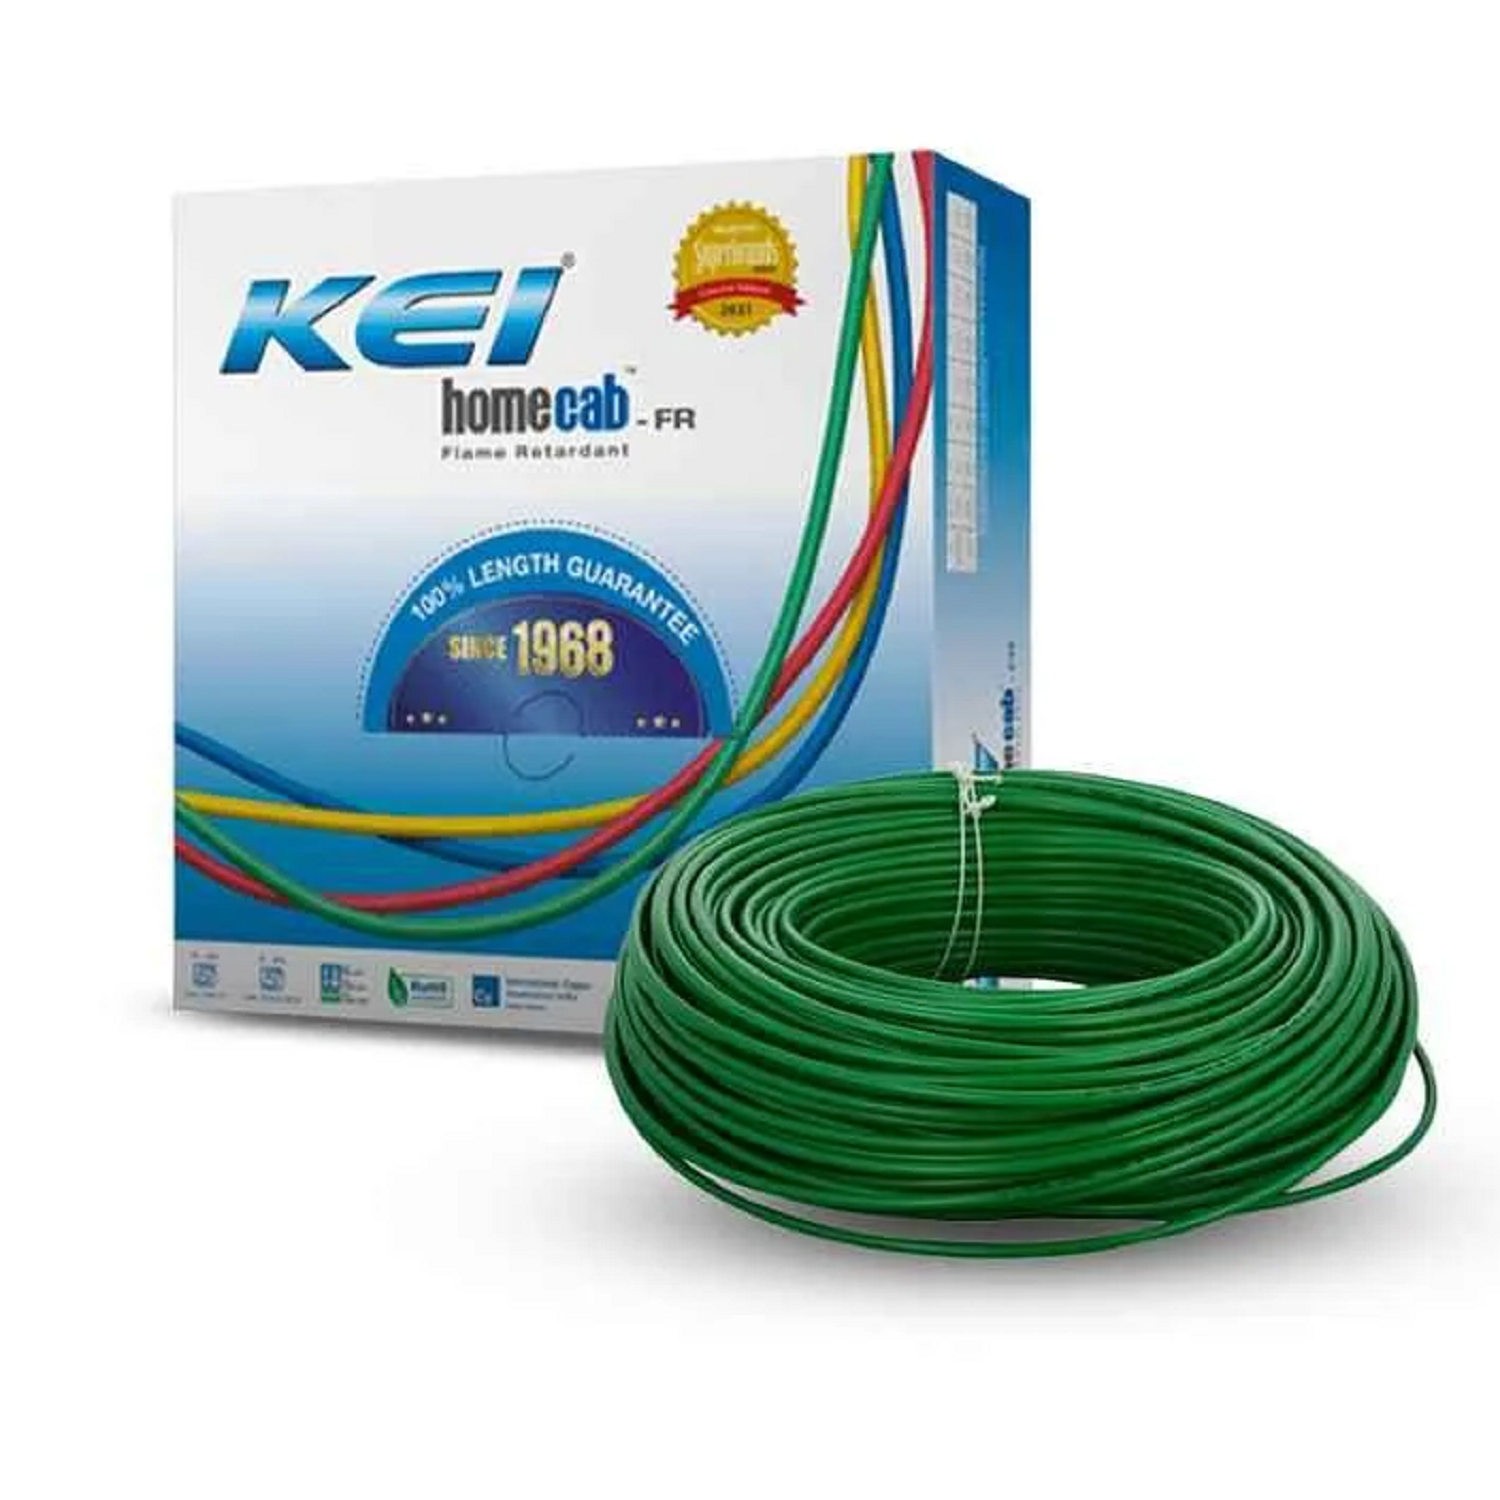 1.0 Sqmm KEI FR Single Core Copper Wire 90 MTR With PVC Insulated for House 38 Industrial (Green)